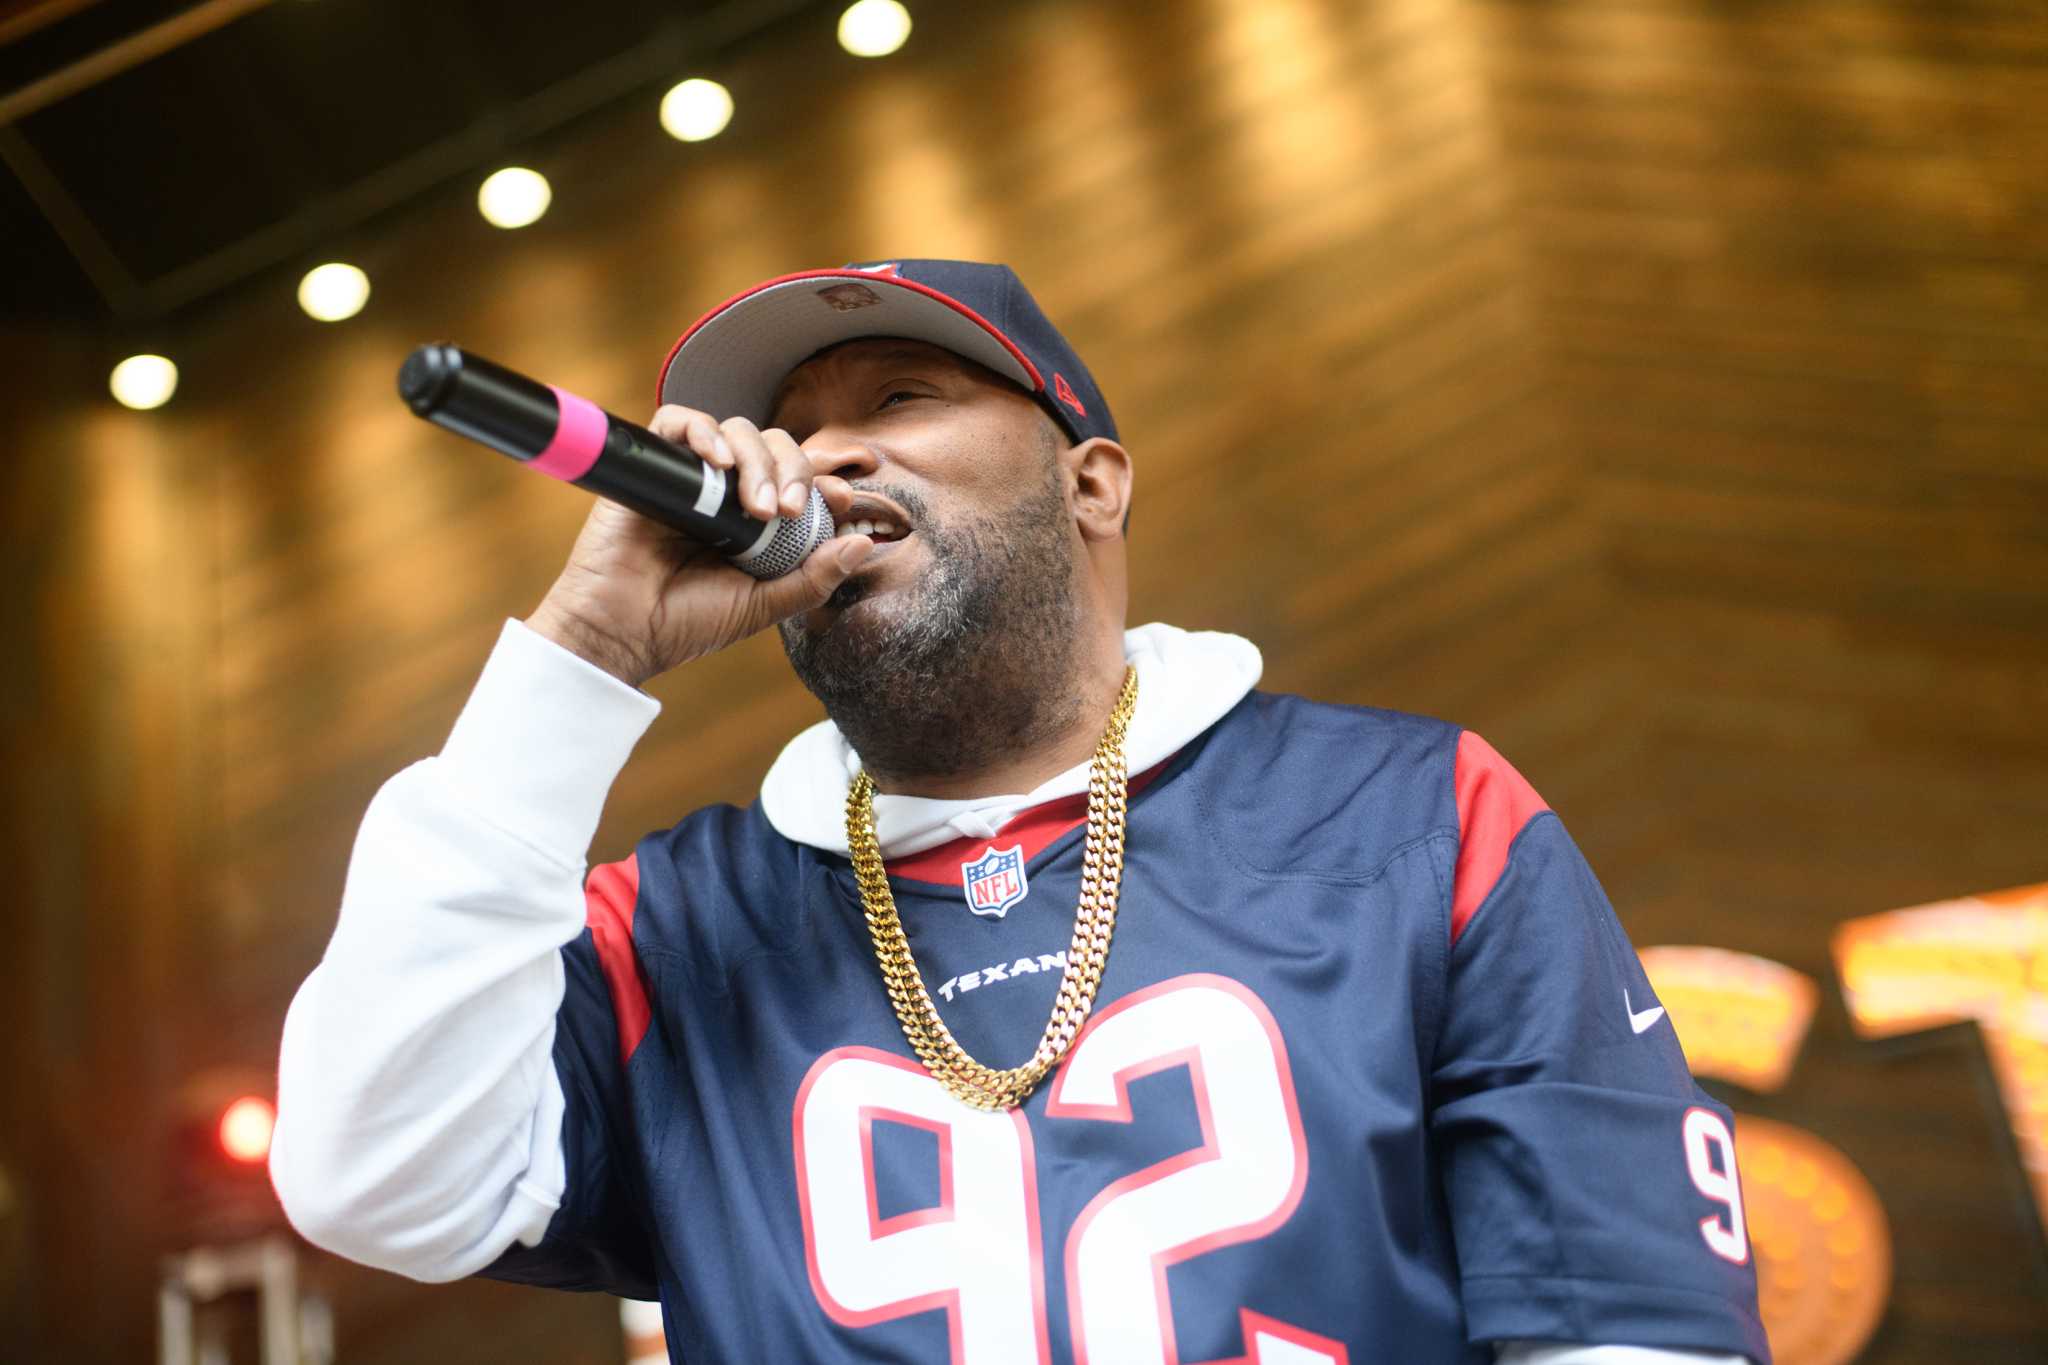 Bun B, Houston hiphop getting its own night at RodeoHouston